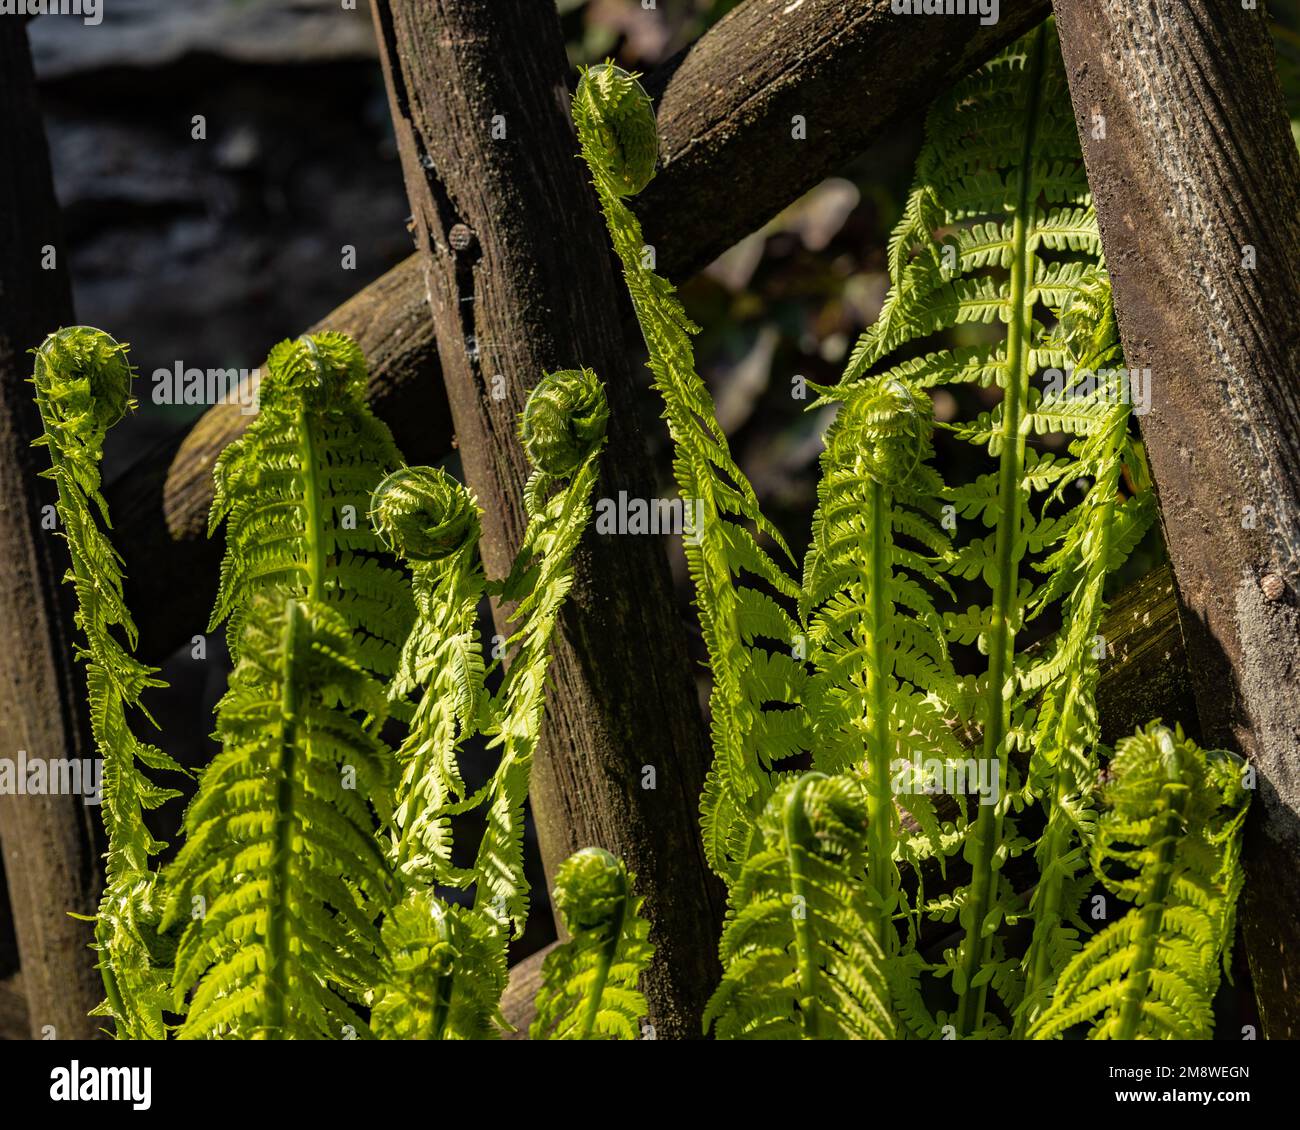 young fern with ringlets near a wooden fence Stock Photo